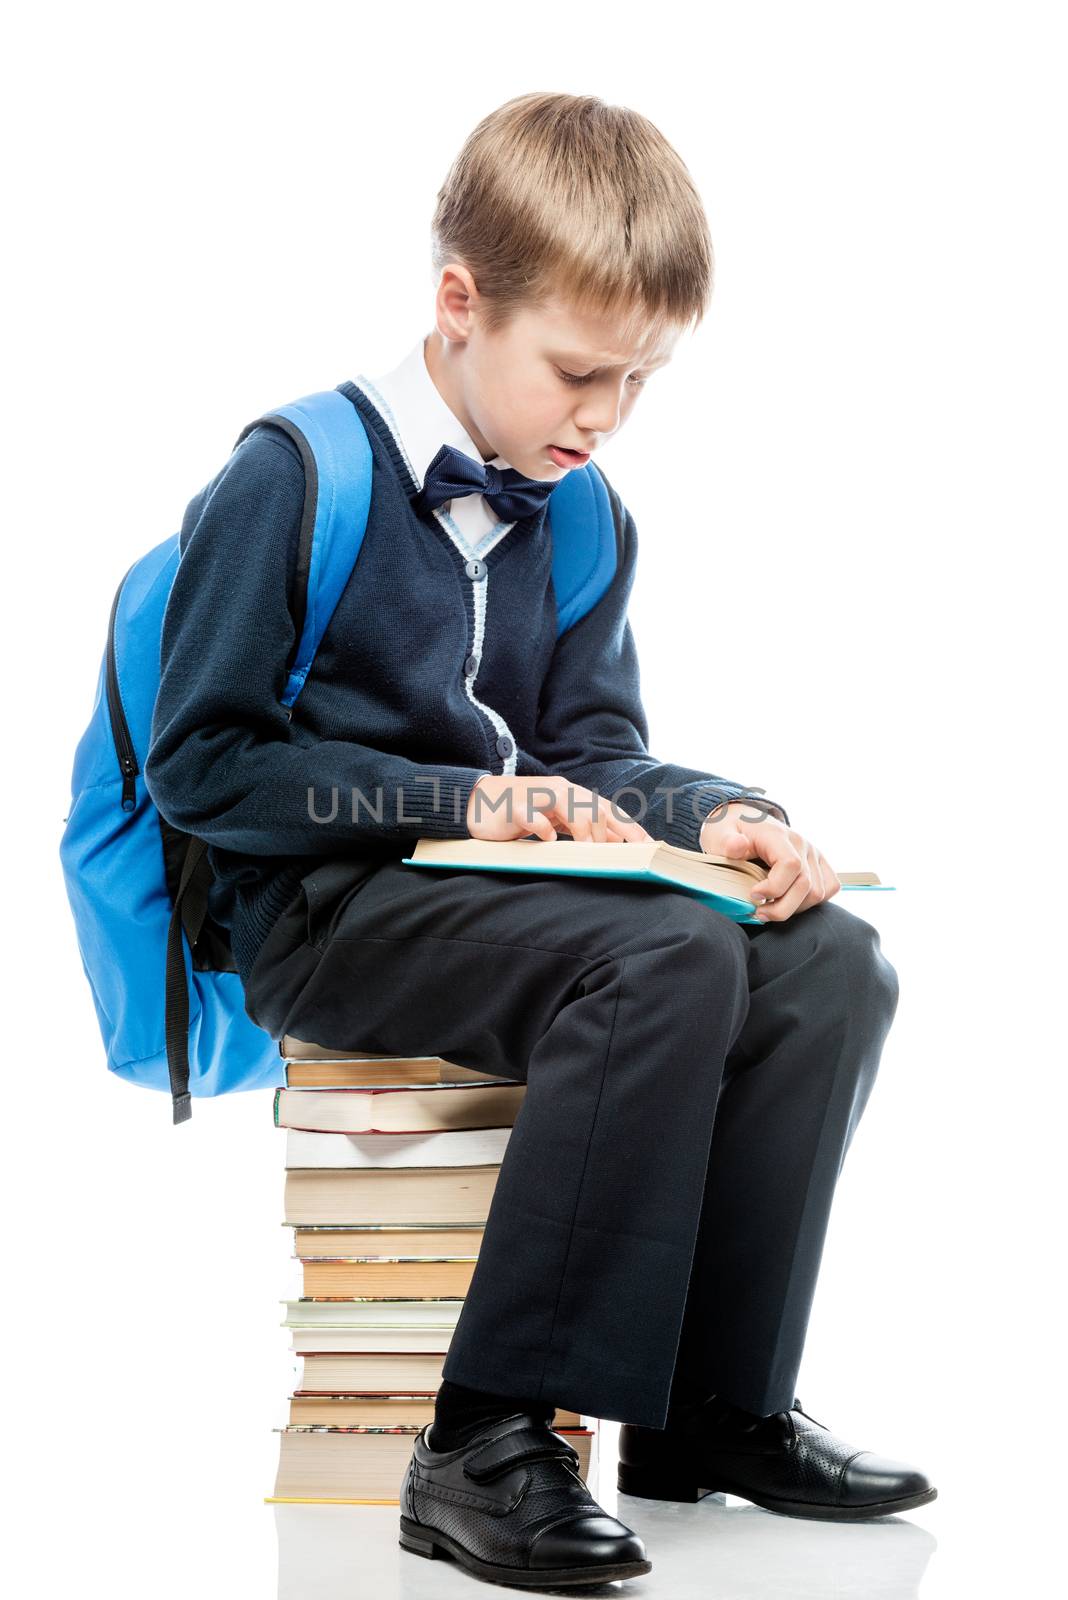 the student is sitting on a pile of books and reads a textbook o by kosmsos111